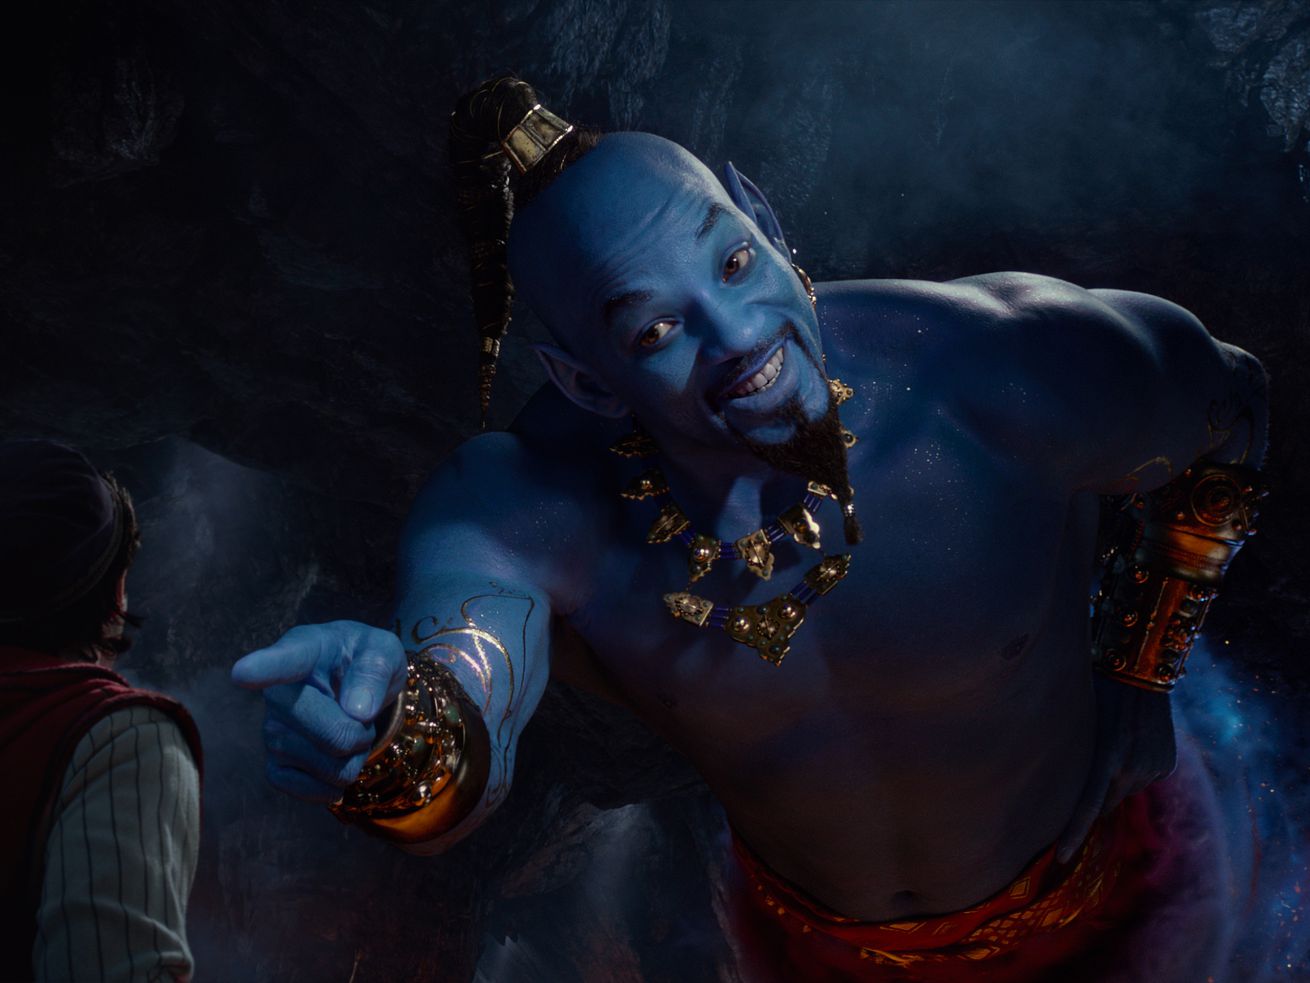 Will Smith plays the Genie in Disney’s live-action adaptation of “Aladdin.”